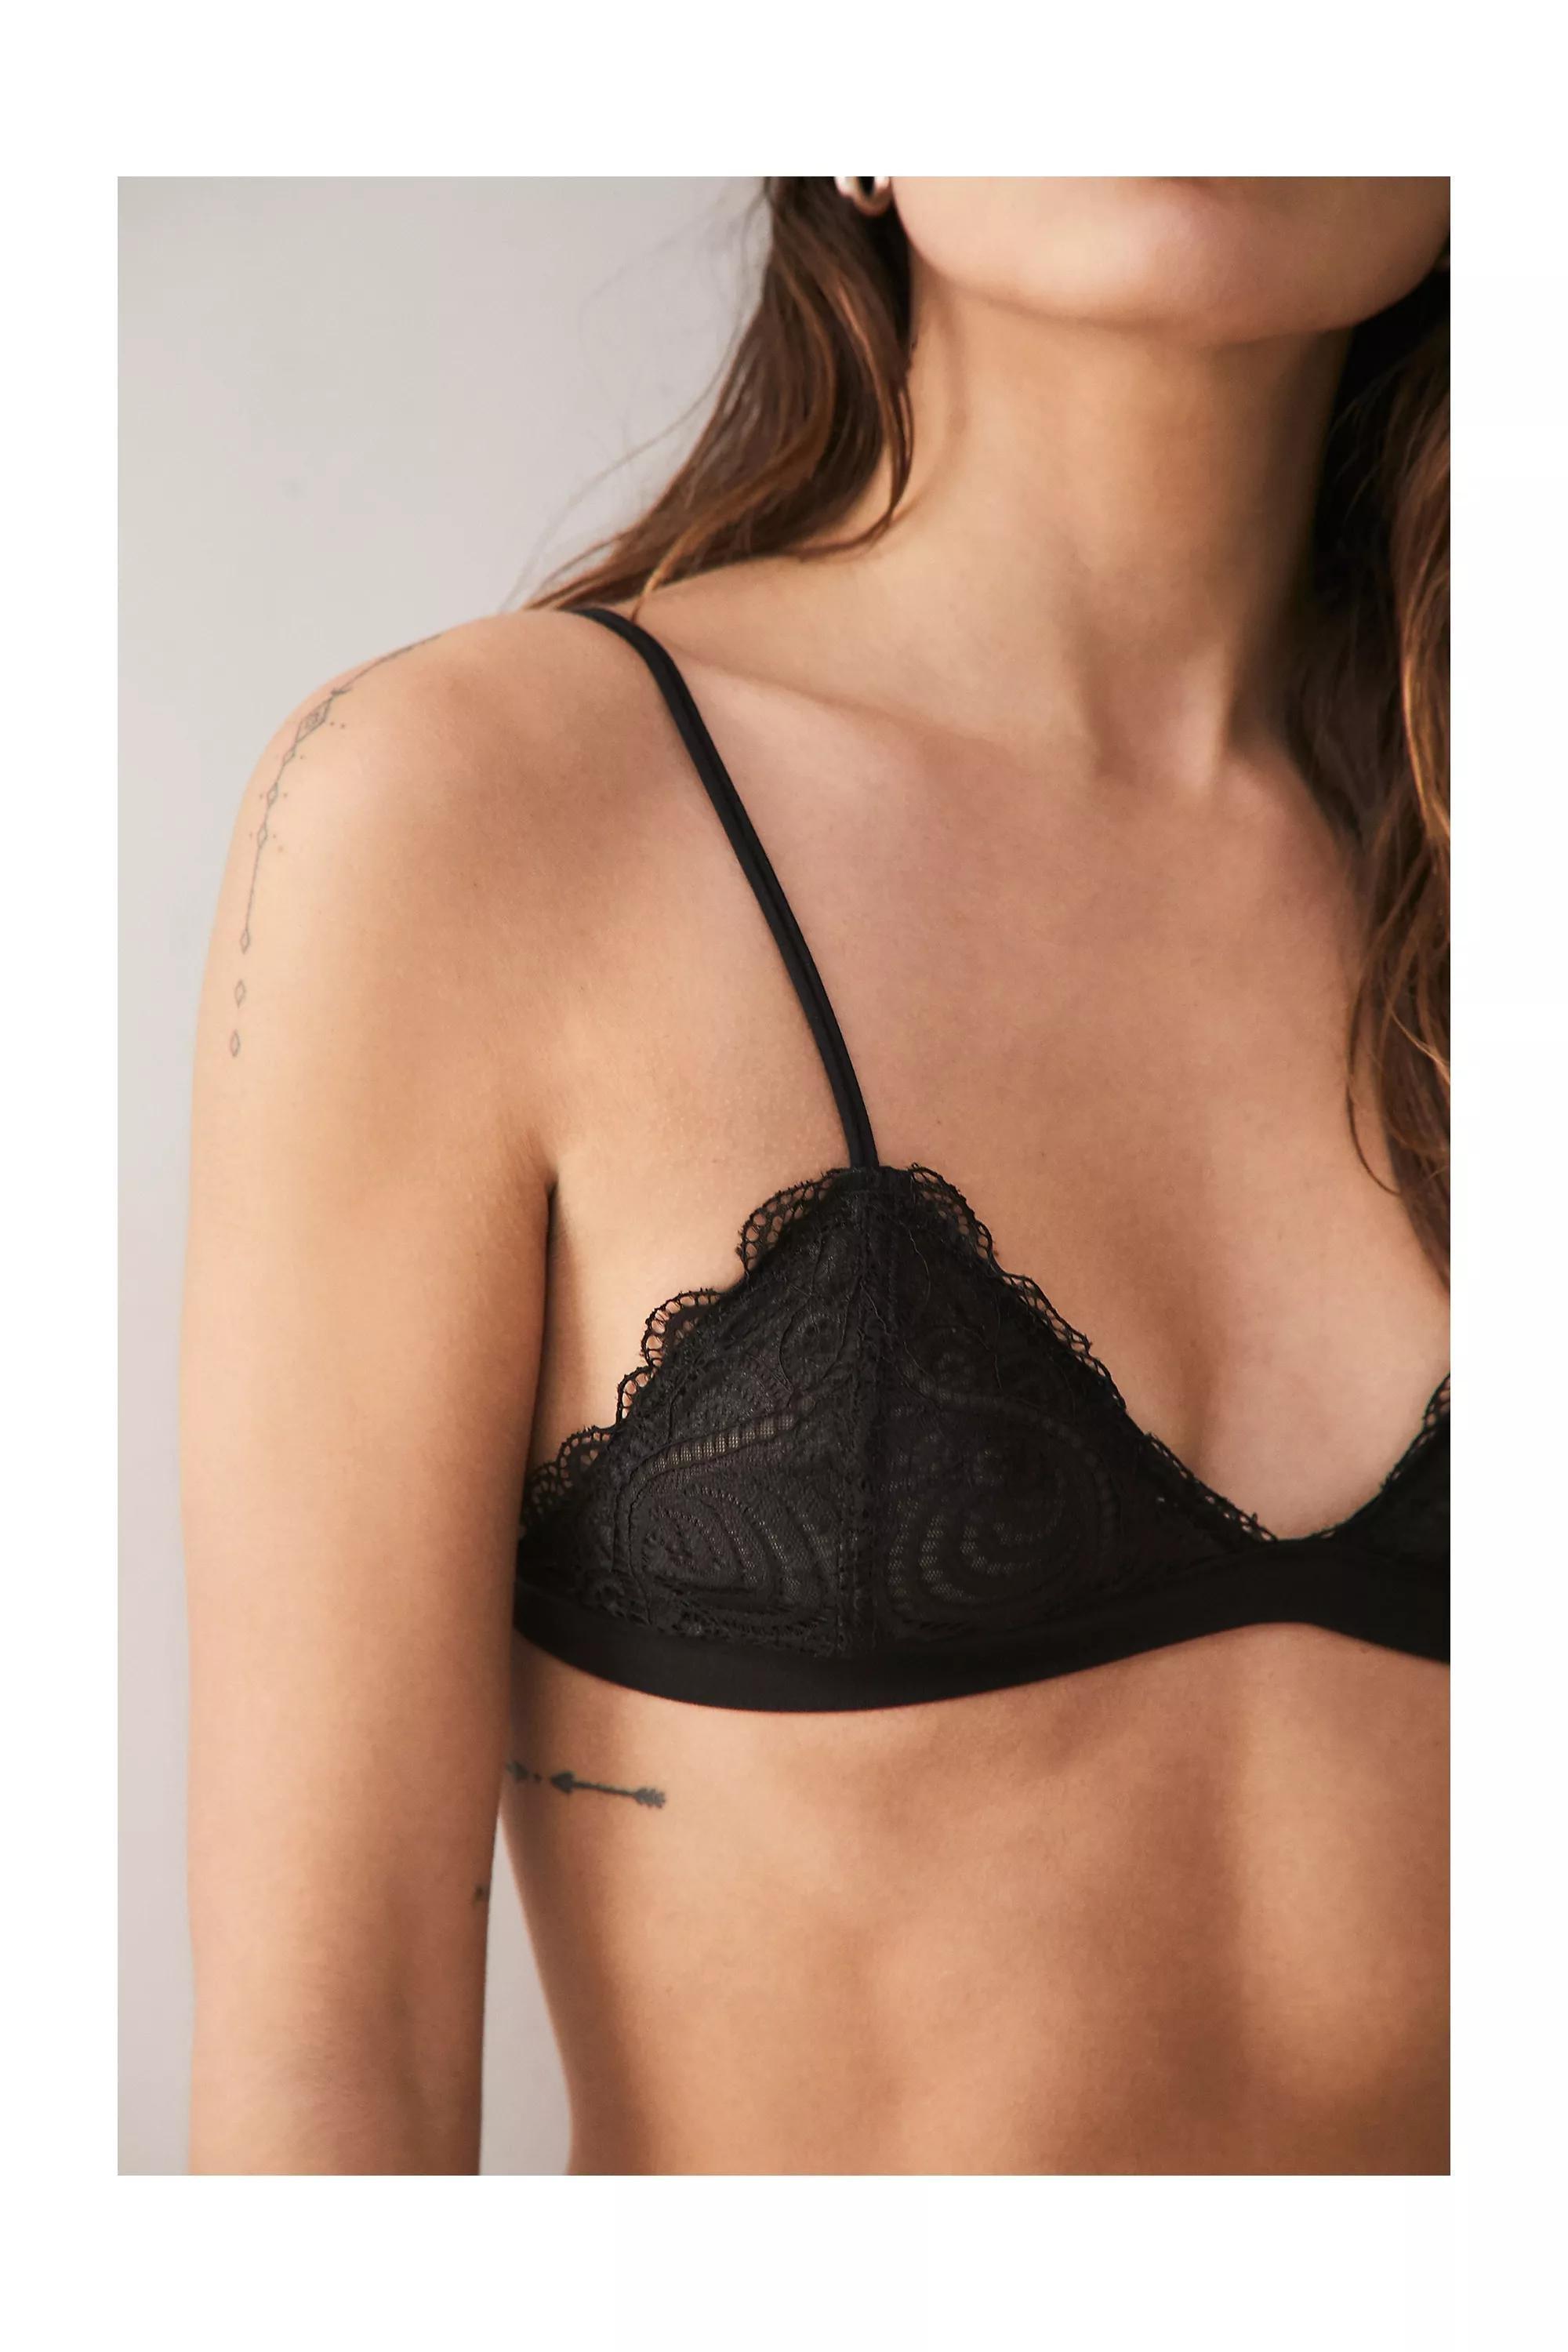 Urban Outfitters Out From Under Miranda Firecracker Lace Triangle